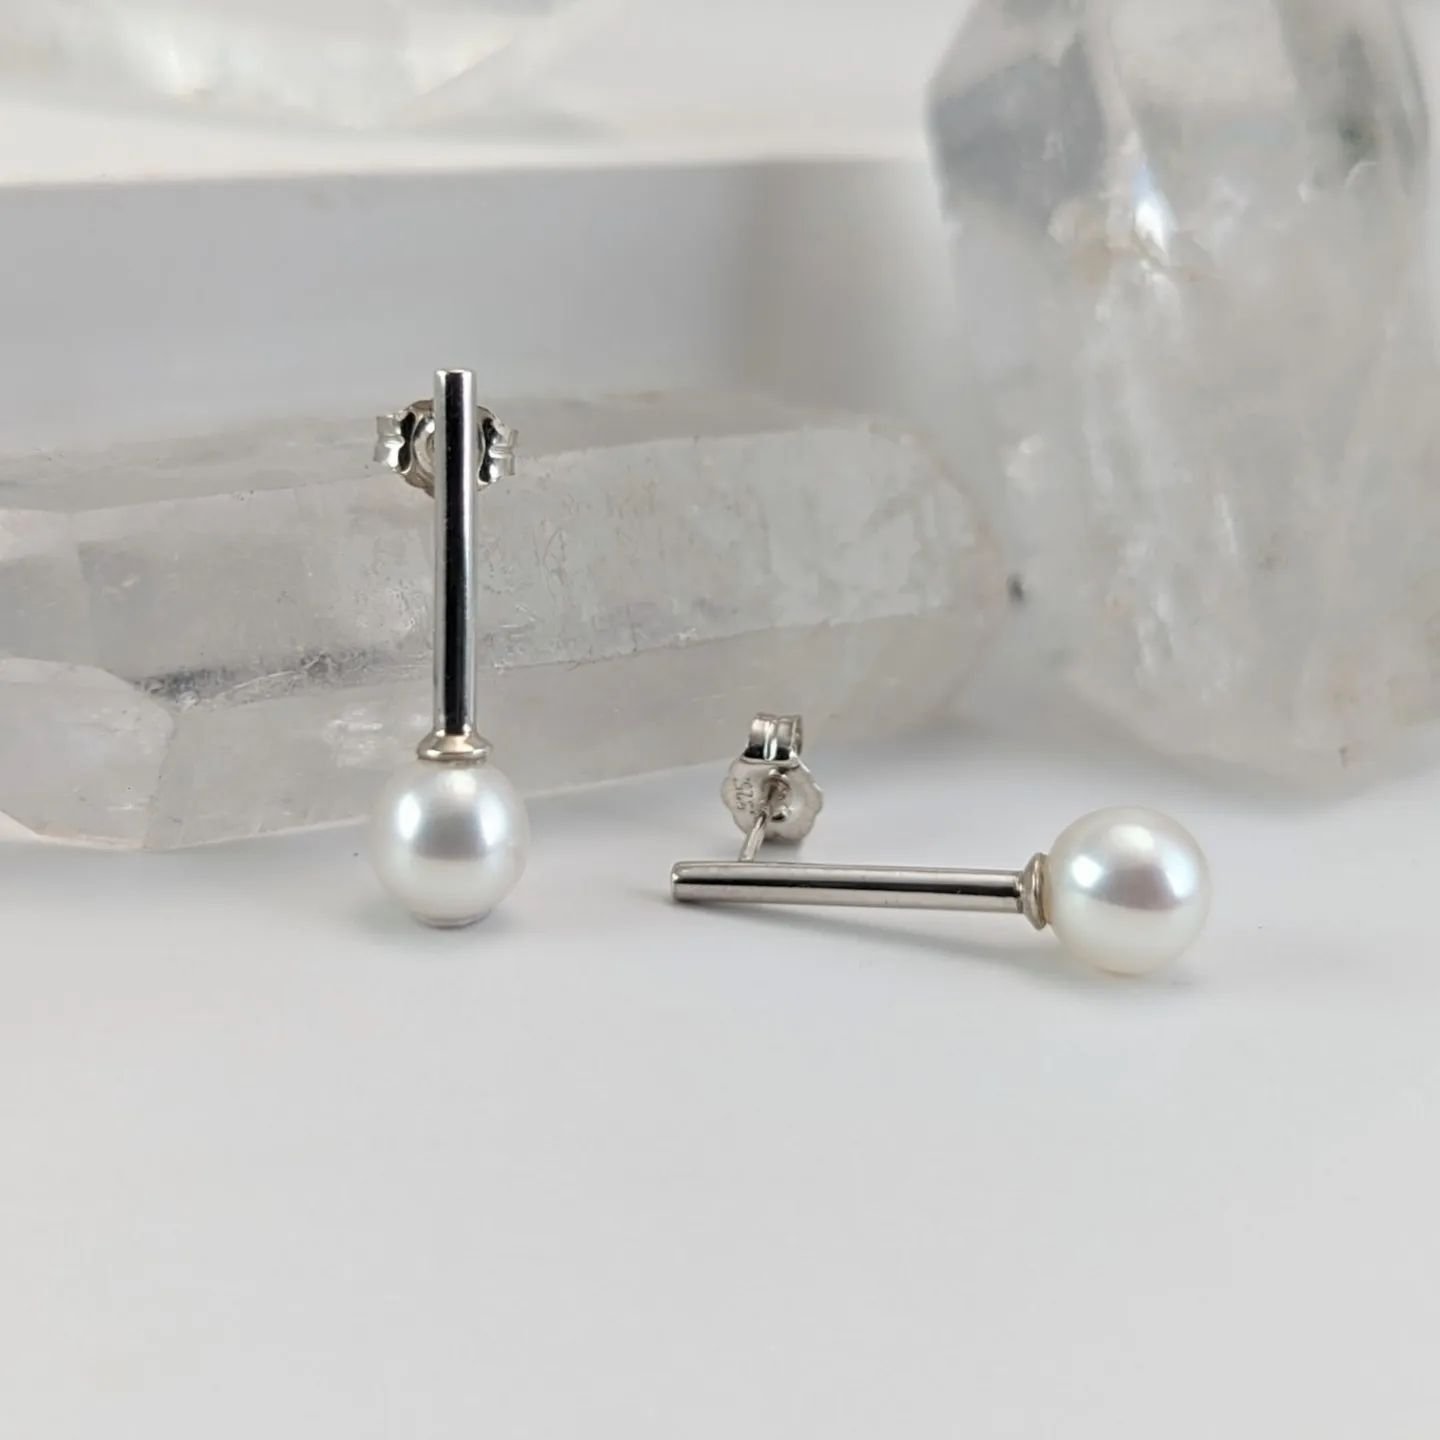 A silly song today to go with my post. These earrings would make perfect mother's day gifts for the stylish mum who loves pearls #lovepearls